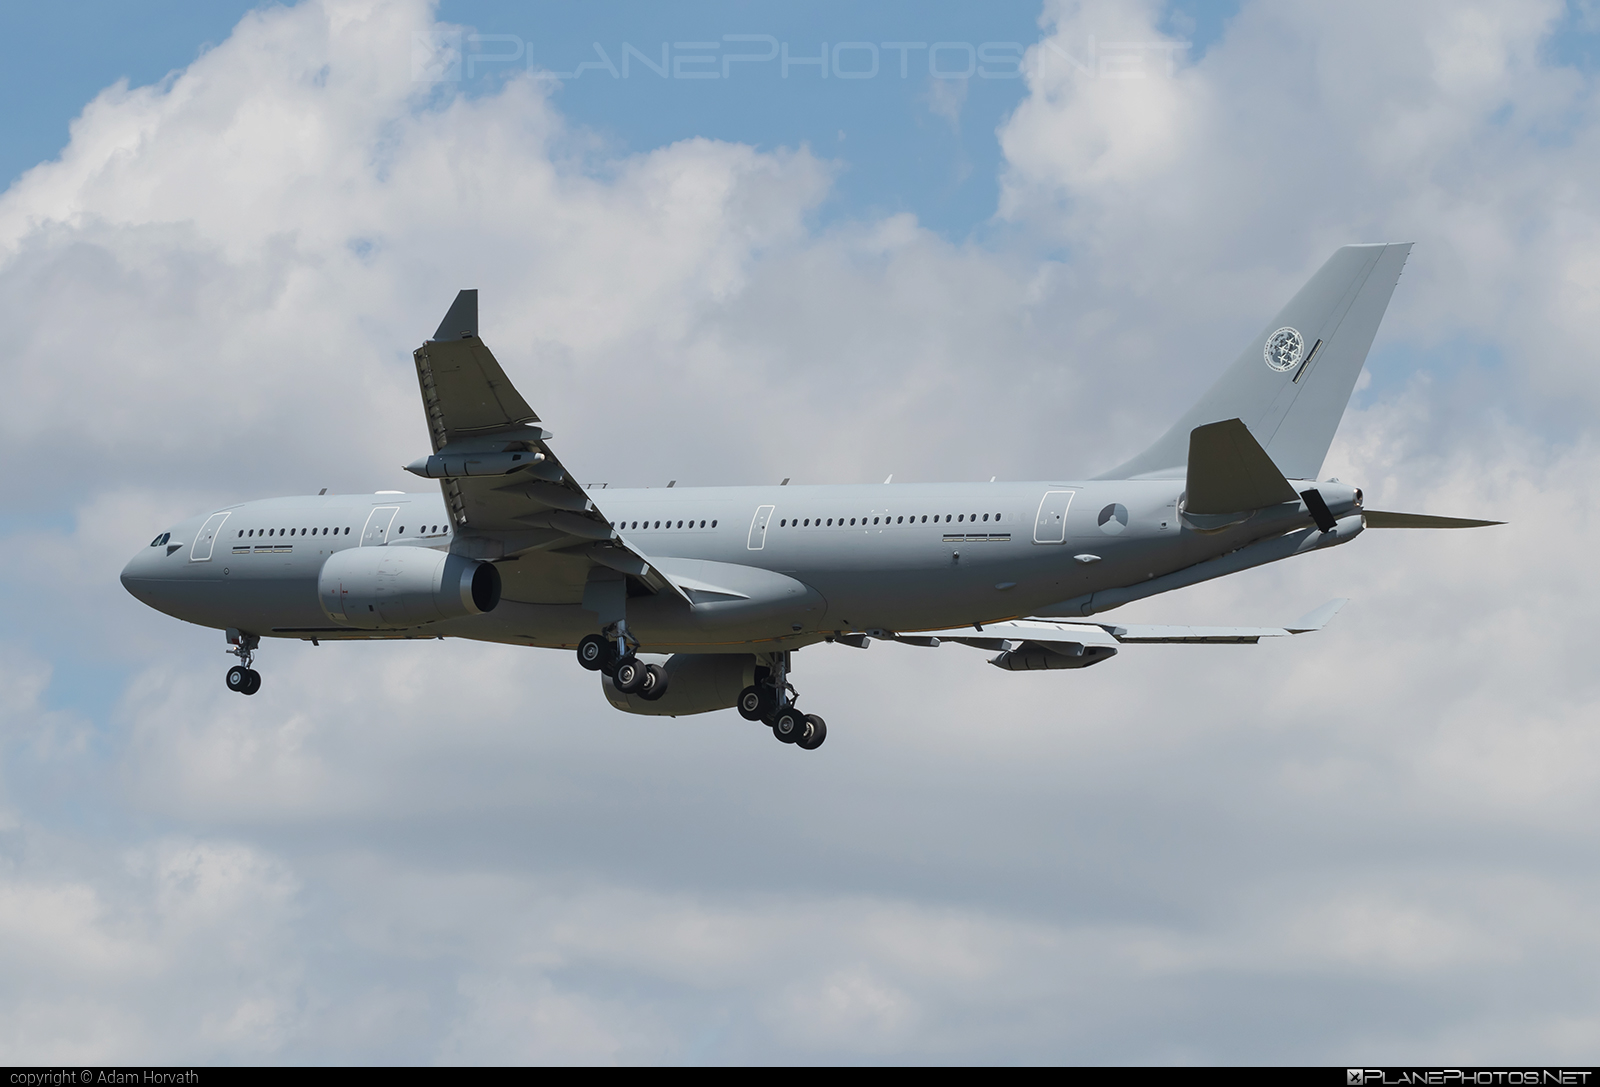 Airbus Military A330-243MRTT - T-056 operated by Koninklijke Luchtmacht (Royal Netherlands Air Force) #a330 #a330mrtt #airbus330 #airbusmilitary #koninklijkeluchtmacht #royalnetherlandsairforce